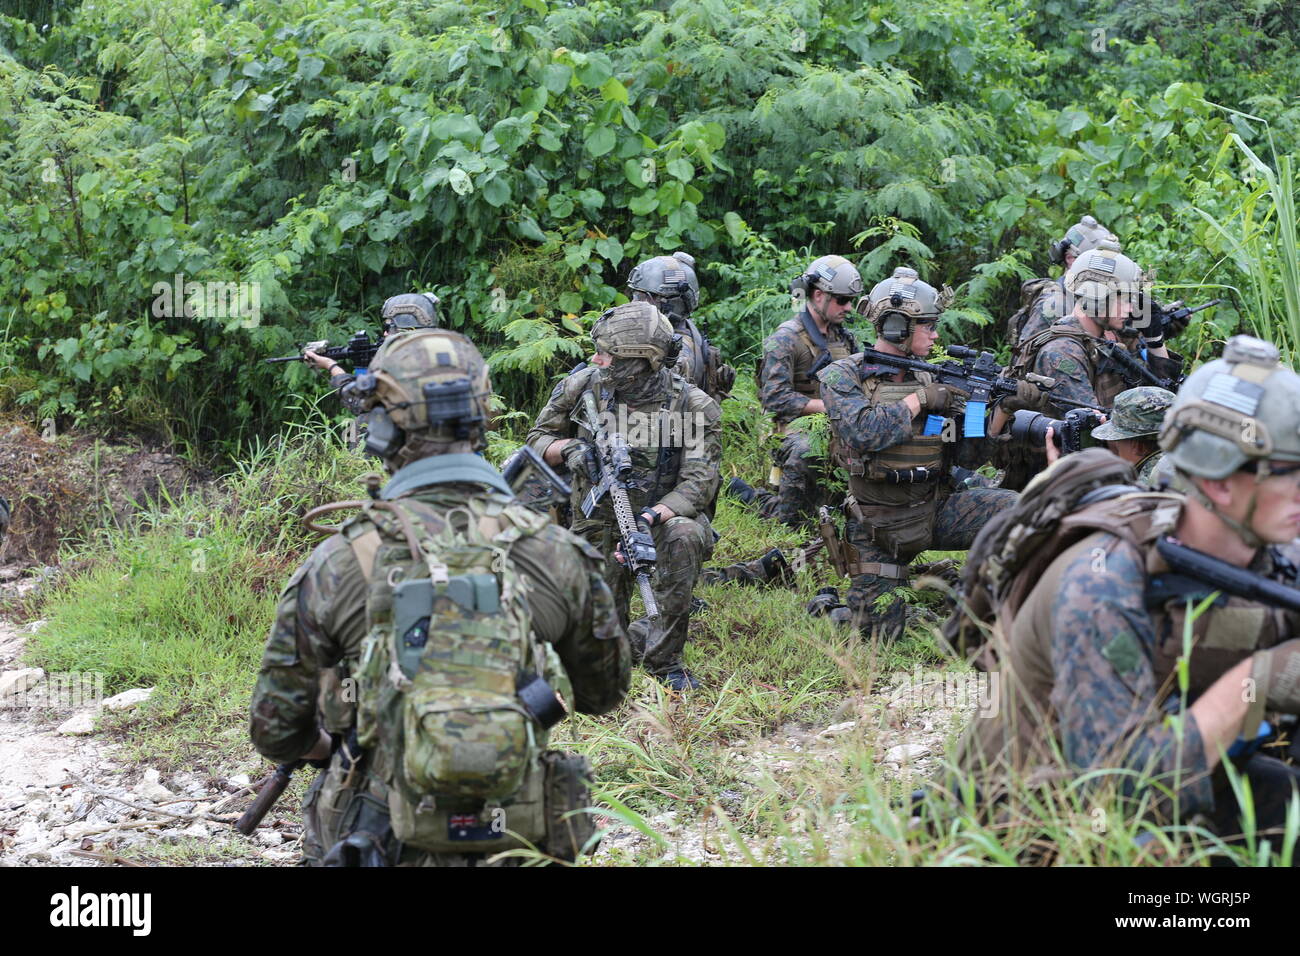 Operators with Special Operations Command Australia join U.S. Marines with 3rd Reconnaissance Battalion, 3rd Marine Division, during a training evolution as part of exercise HYDRACRAB in Santa Rita, Guam, Aug. 26, 2019. HYDRACRAB is a multilateral exercise conducted by U.S. Marines and Sailors with military service members from Australia, Canada, and New Zealand. The purpose of this exercise is to prepare the participating Explosive Ordnance Disposal forces to operate as an integrated, capable, and effective allied force ready to operate in a changing and complex maritime environment throughou Stock Photo